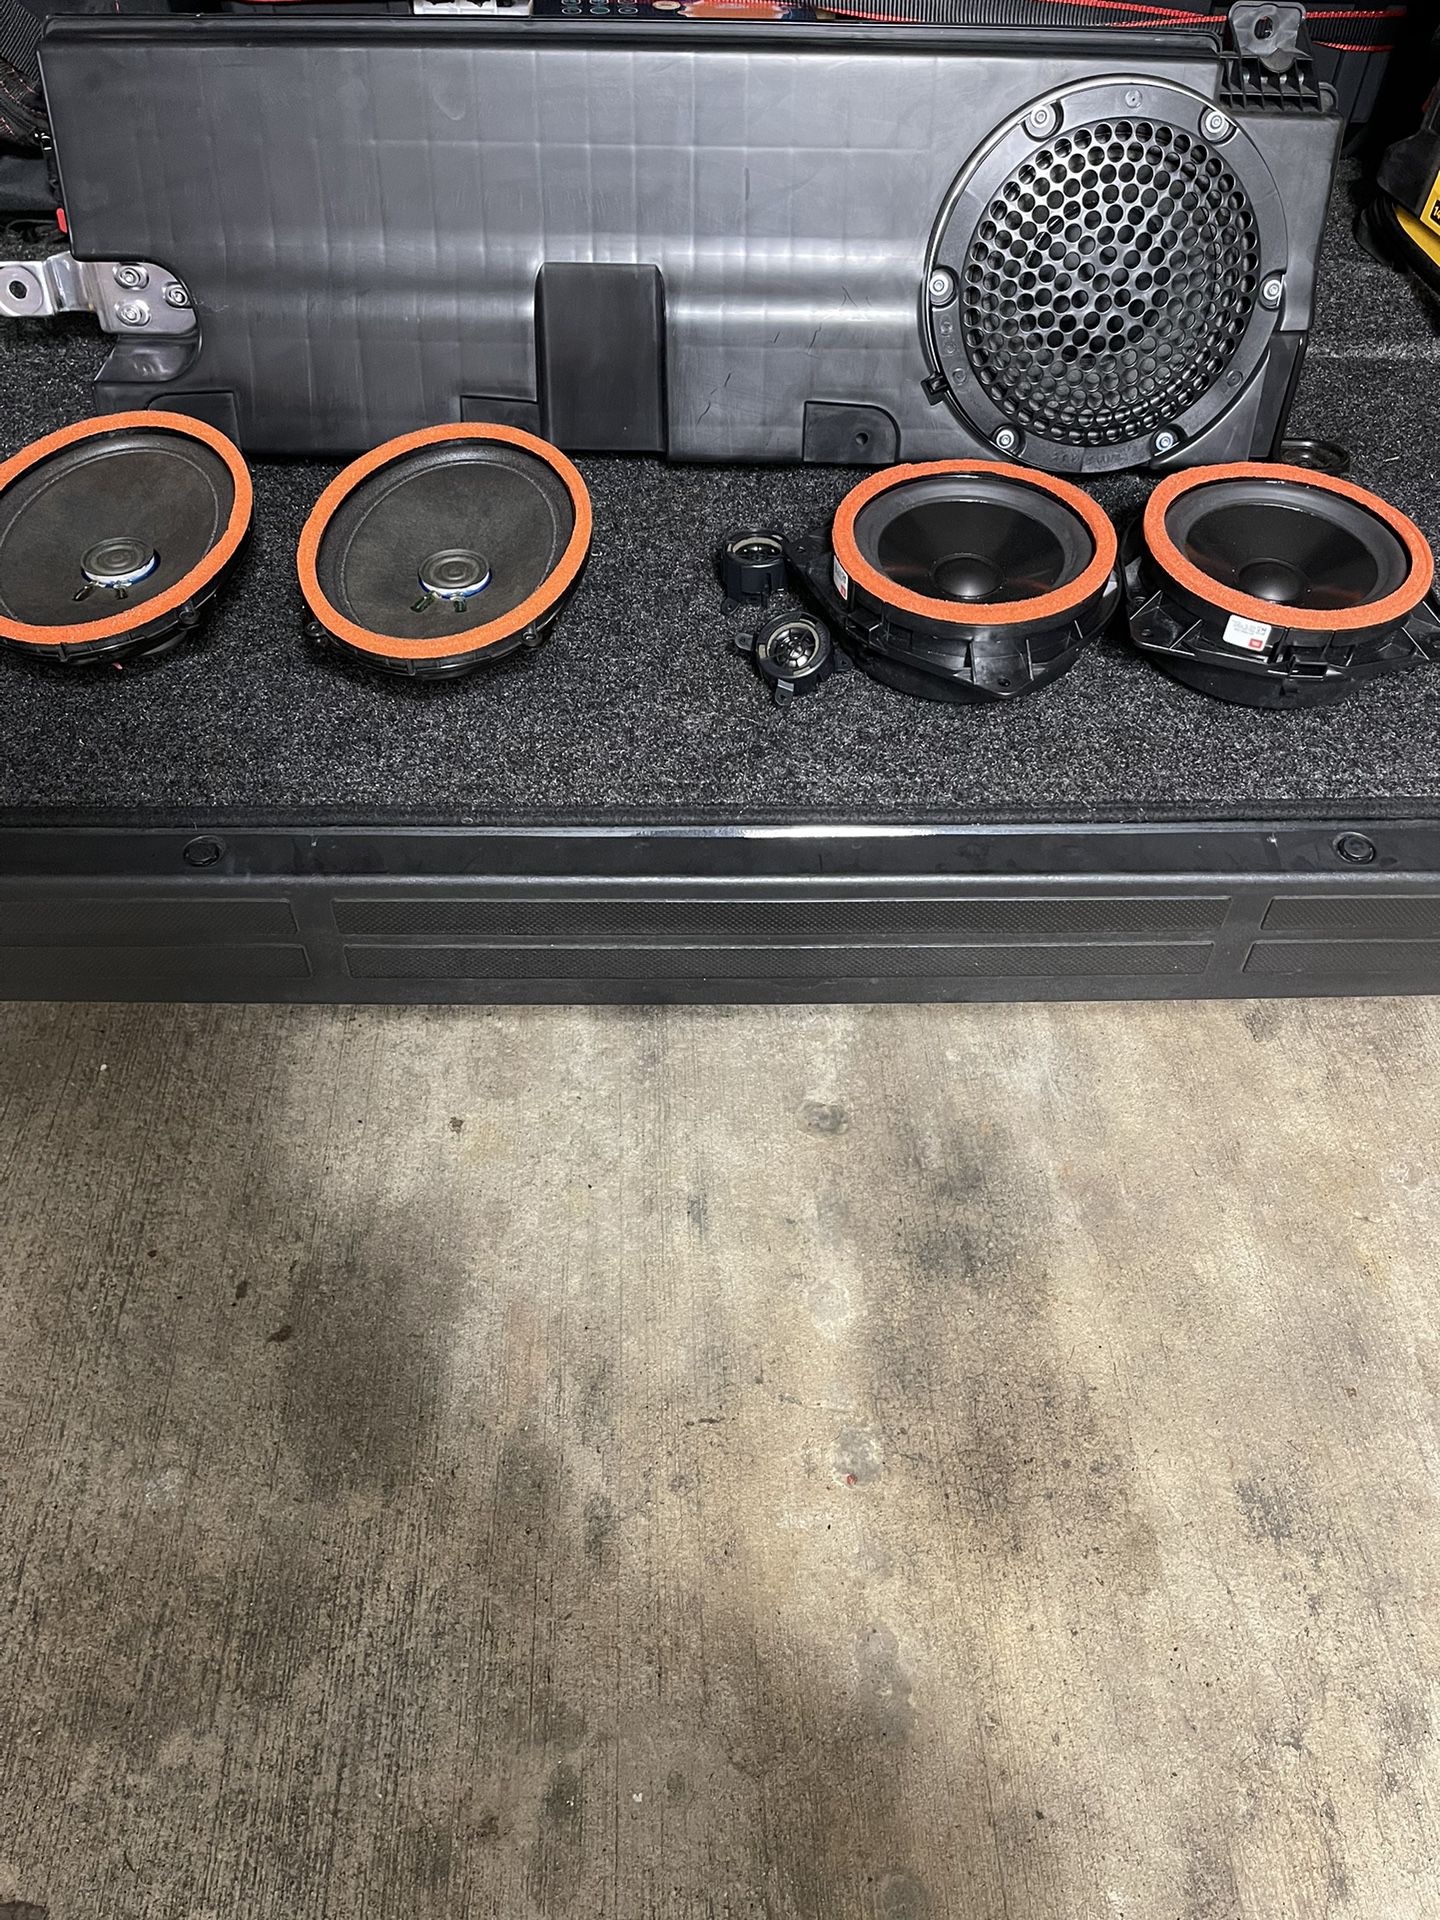 2019 Toyota Tundra OEM JBL Speakers And Subwoofer